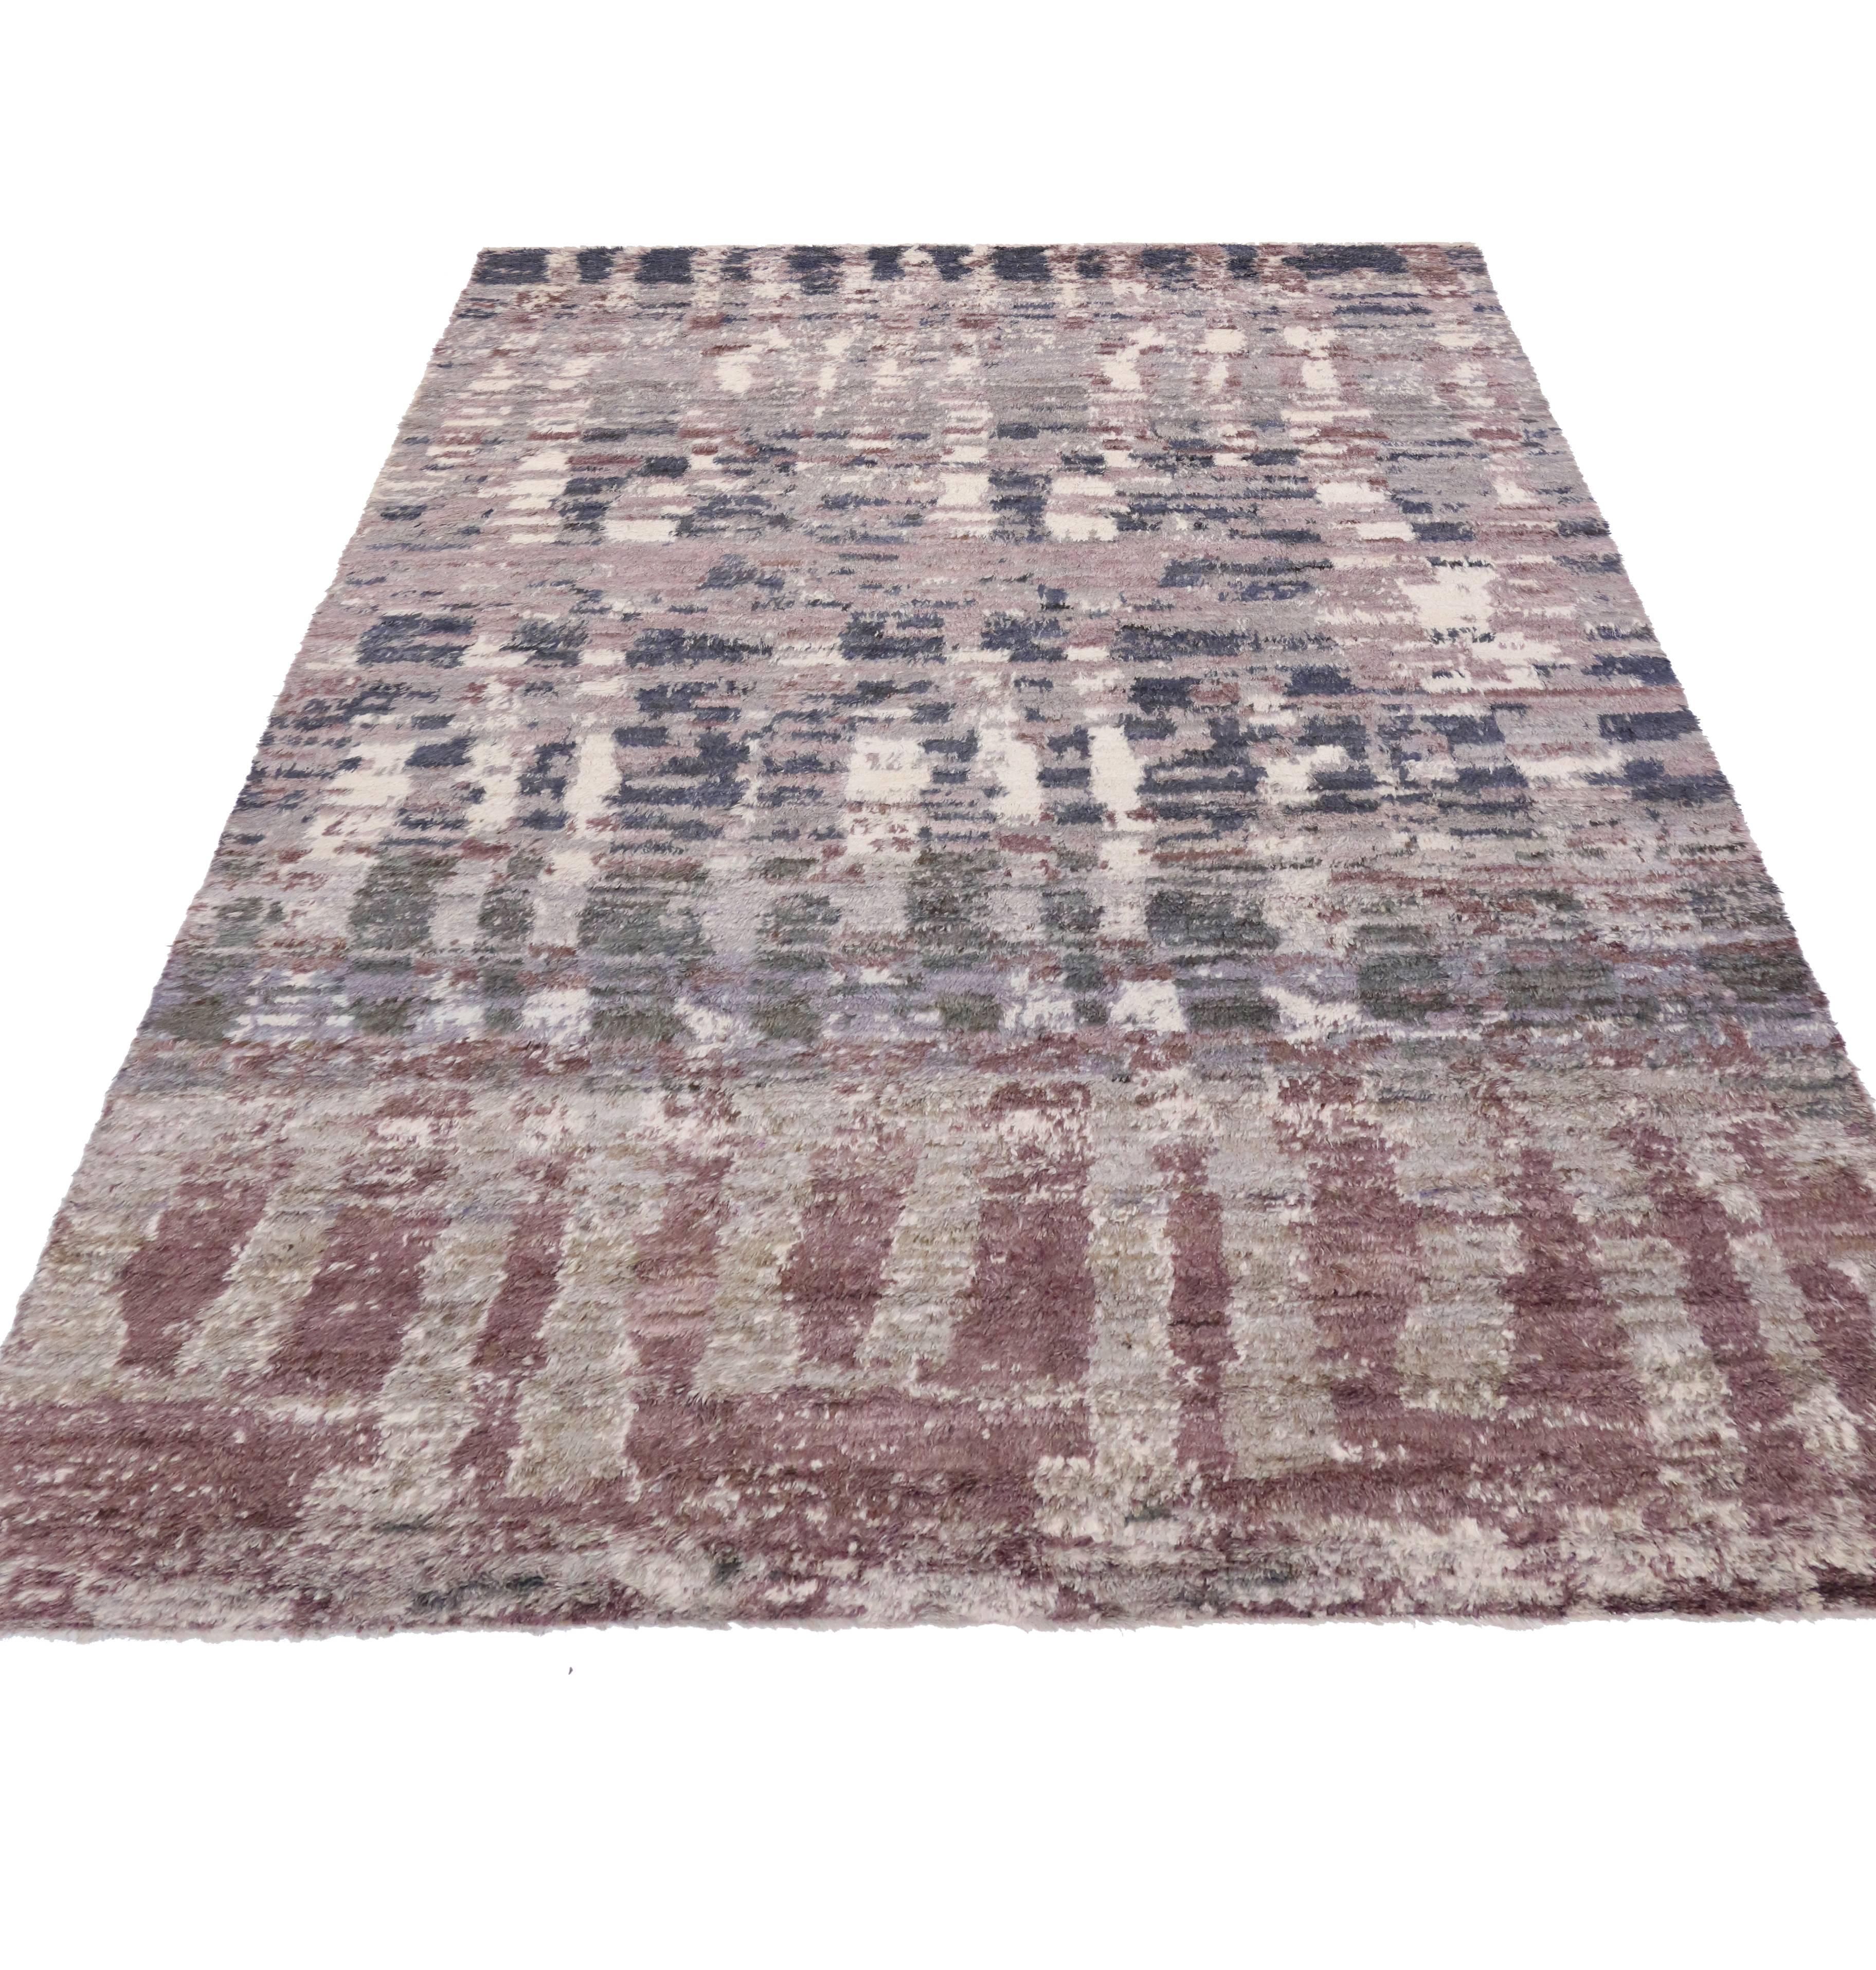 Tribal Contemporary Moroccan Style Area Rug with Postmodern Memphis Style